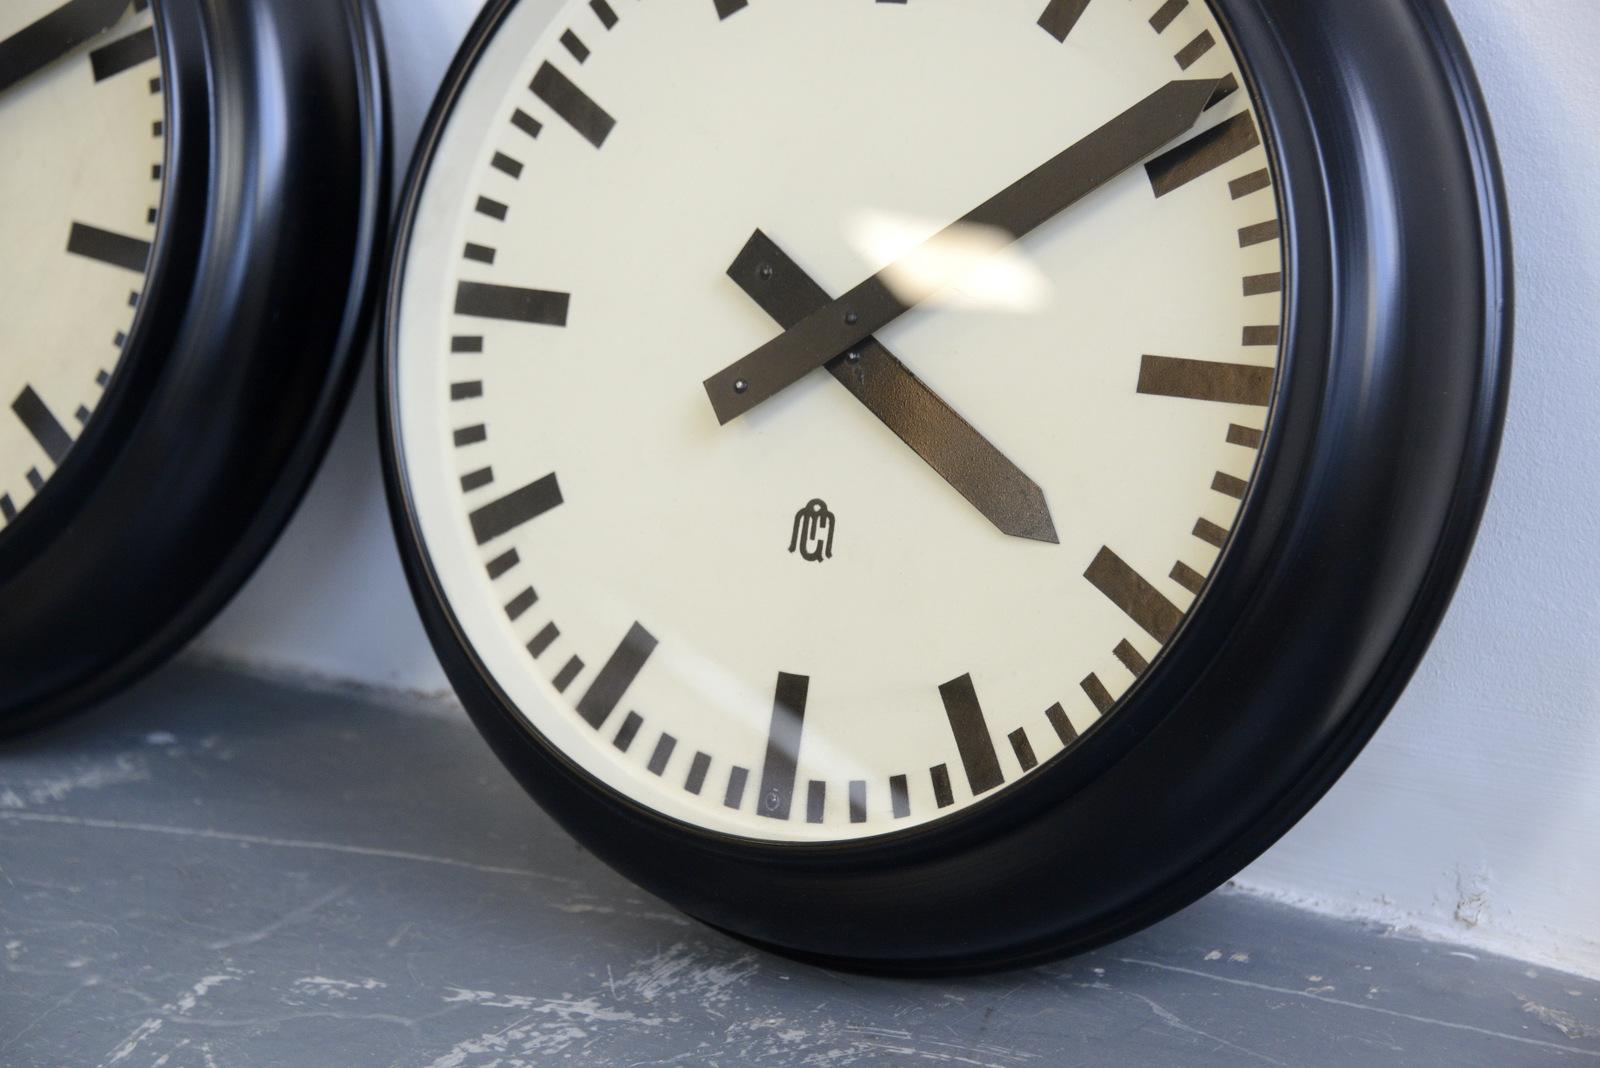 Modernist German office clocks, circa 1930s

- Price is per clock
- Stepped steel casing
- Glass face
- Steel dial
- New quartz motor
- Takes 1x AA battery
- German, 1930s
- Measures: 40cm wide x 8cm deep

Condition report

Fully